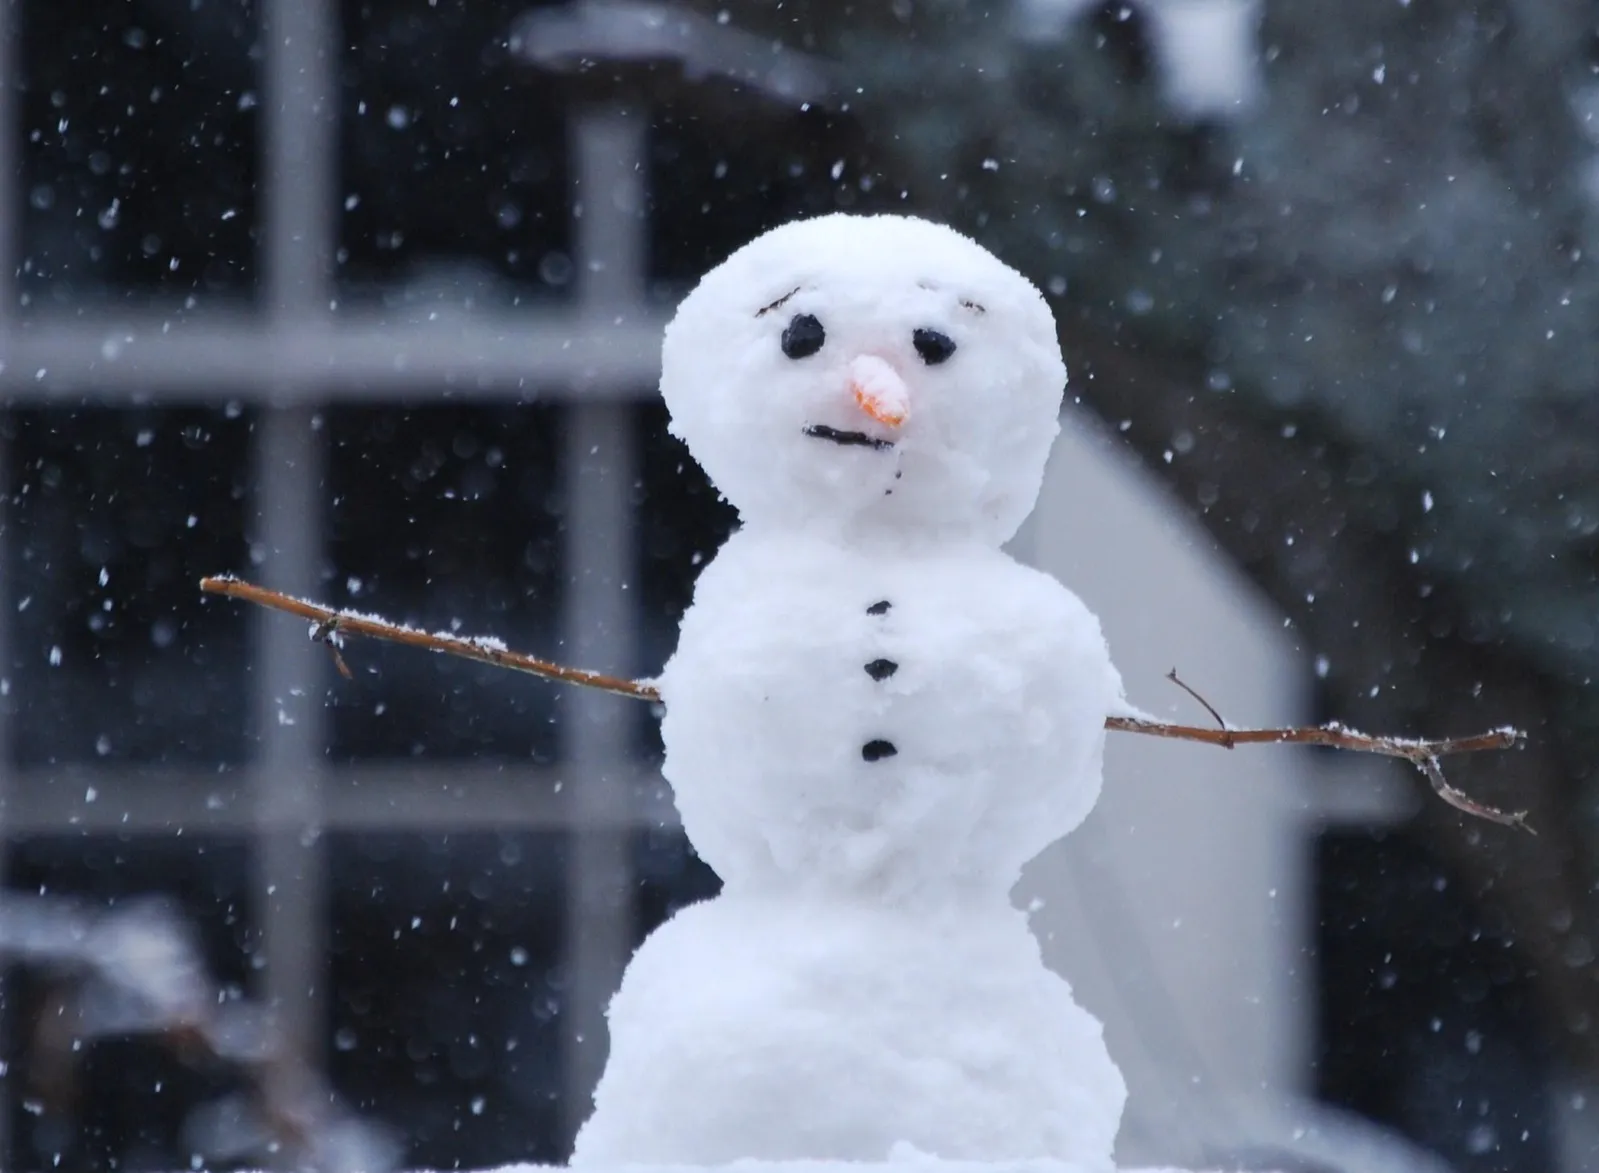 Do You Want To Build a Snowman? Physics Can Help | Science| Smithsonian  Magazine